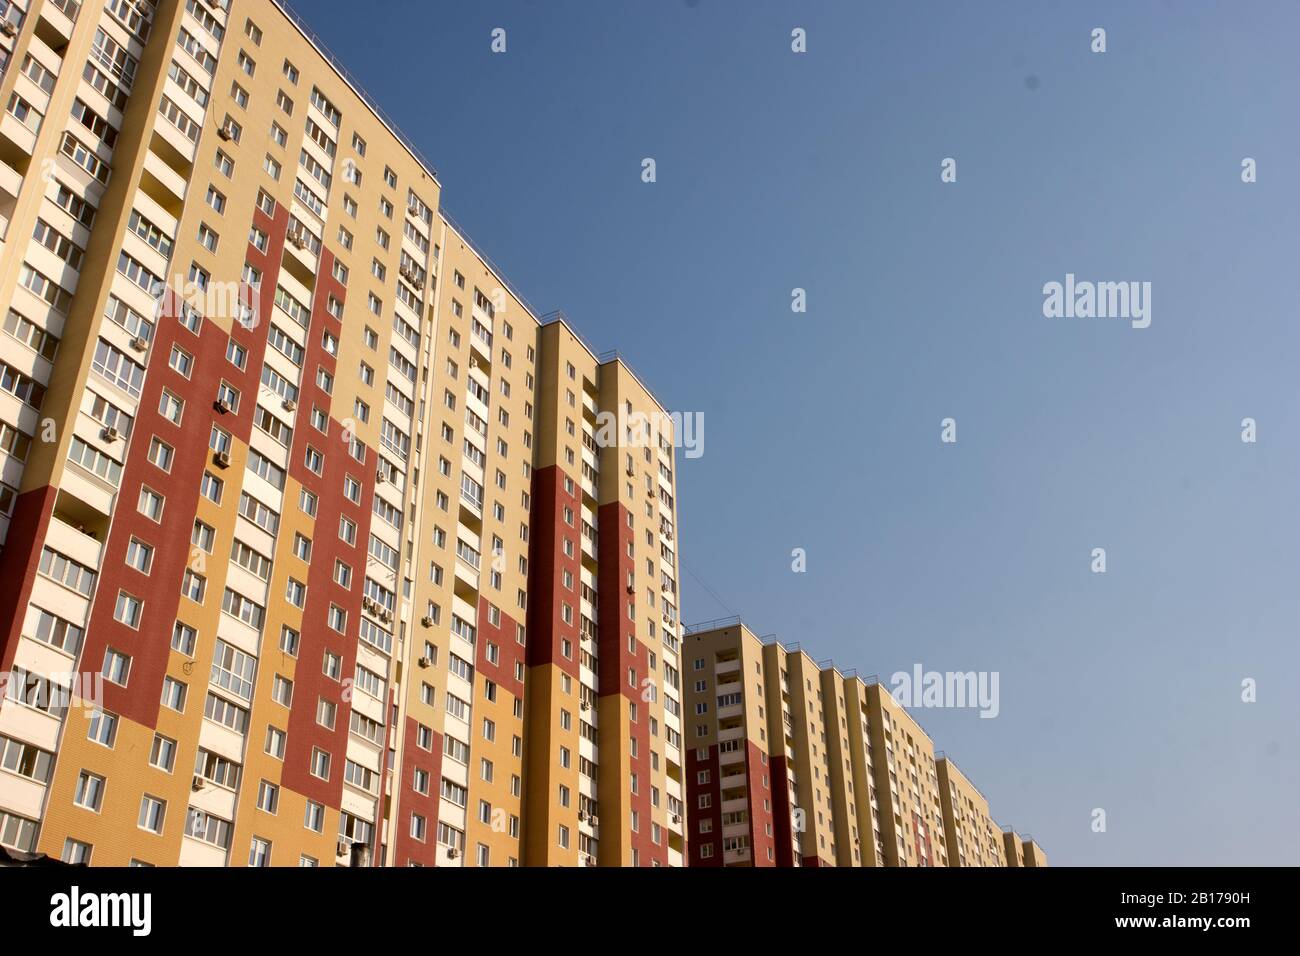 Tall apartment building. Stock Photo